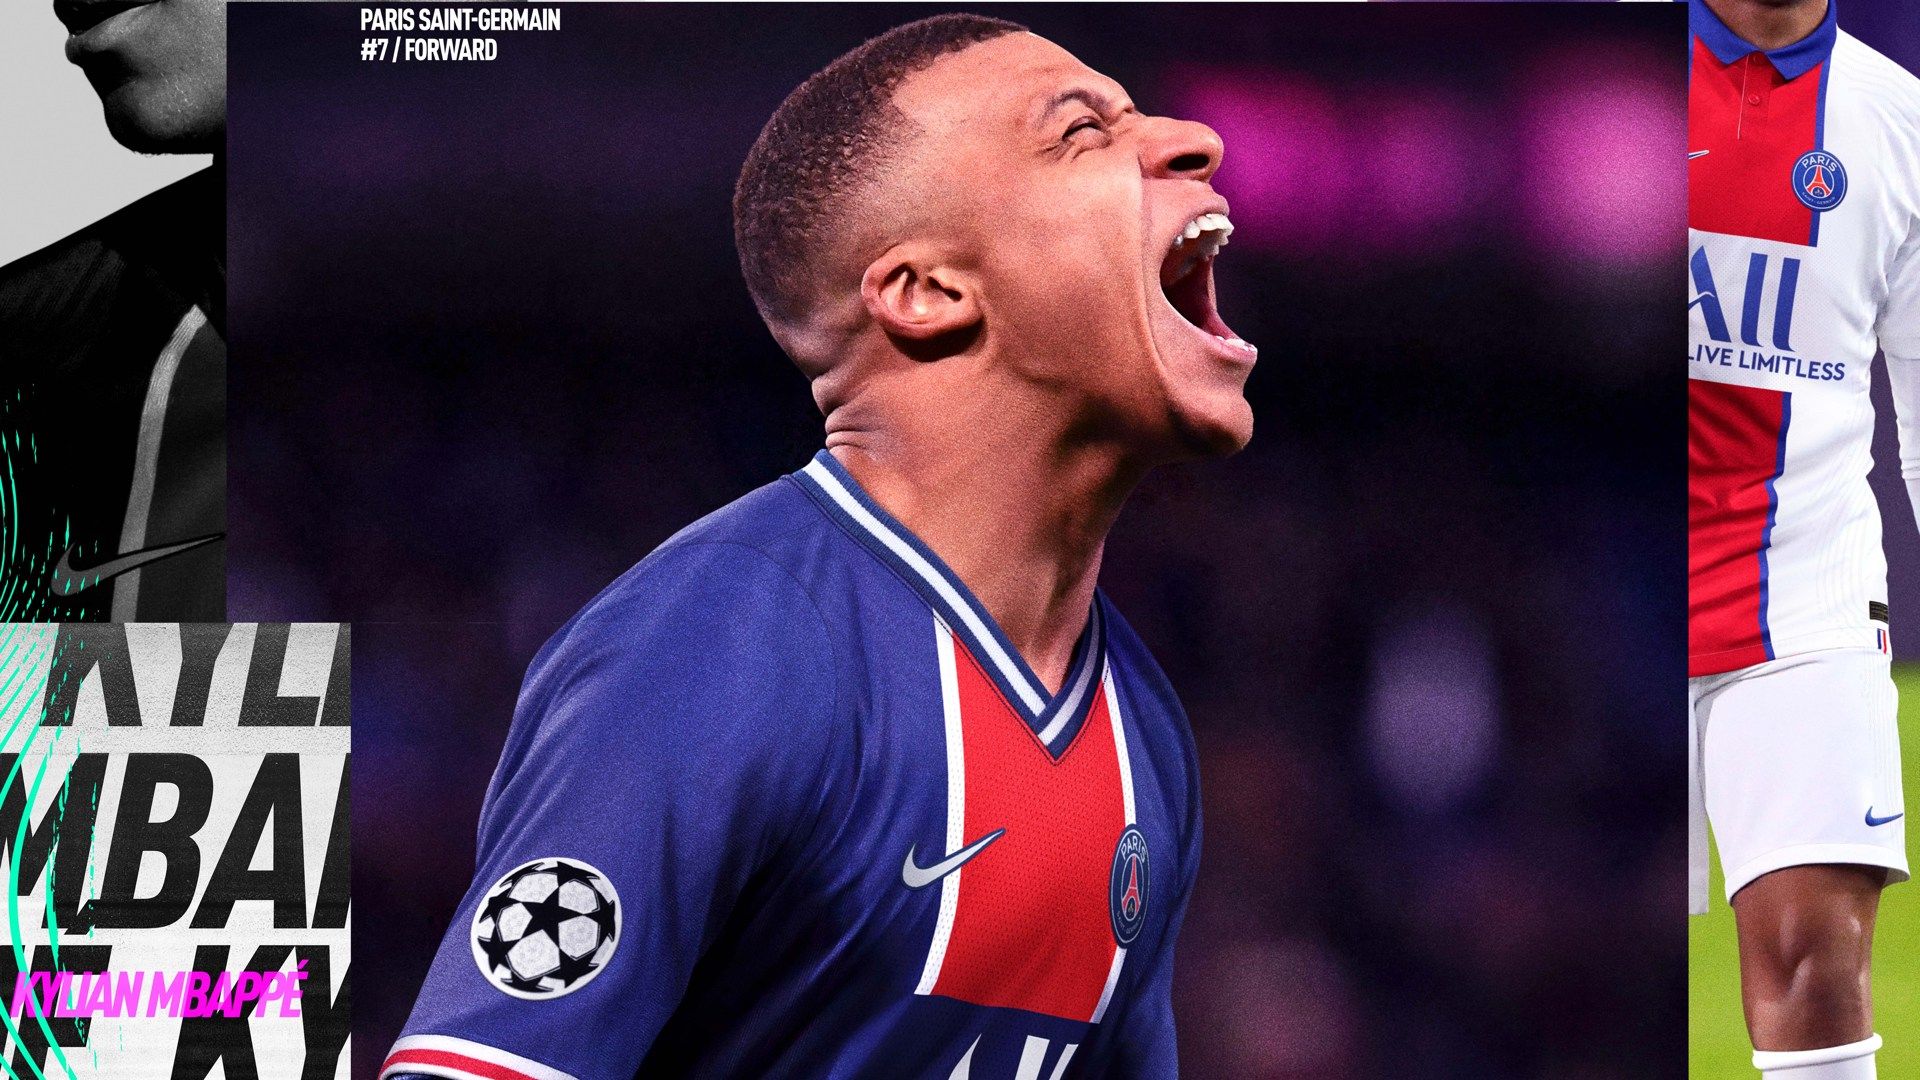 FIFA 21 Gets Official Reveal Trailer; Kylian Mbappé Is Cover Athlete